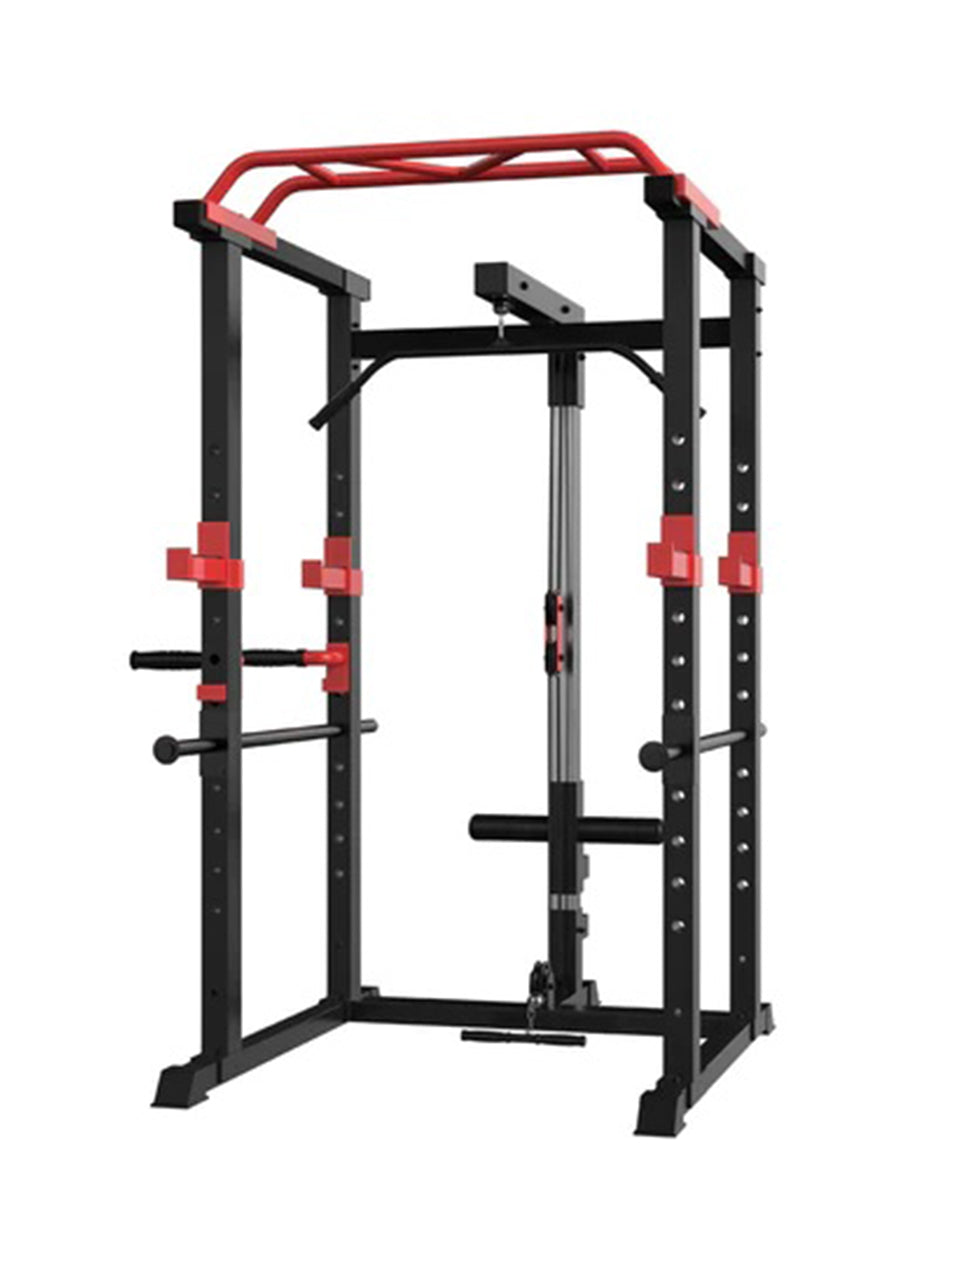 1441 Fitness Heavy Duty Squat Rack & Power Cage with Pull Up Bar J008 - Grey Color Frame